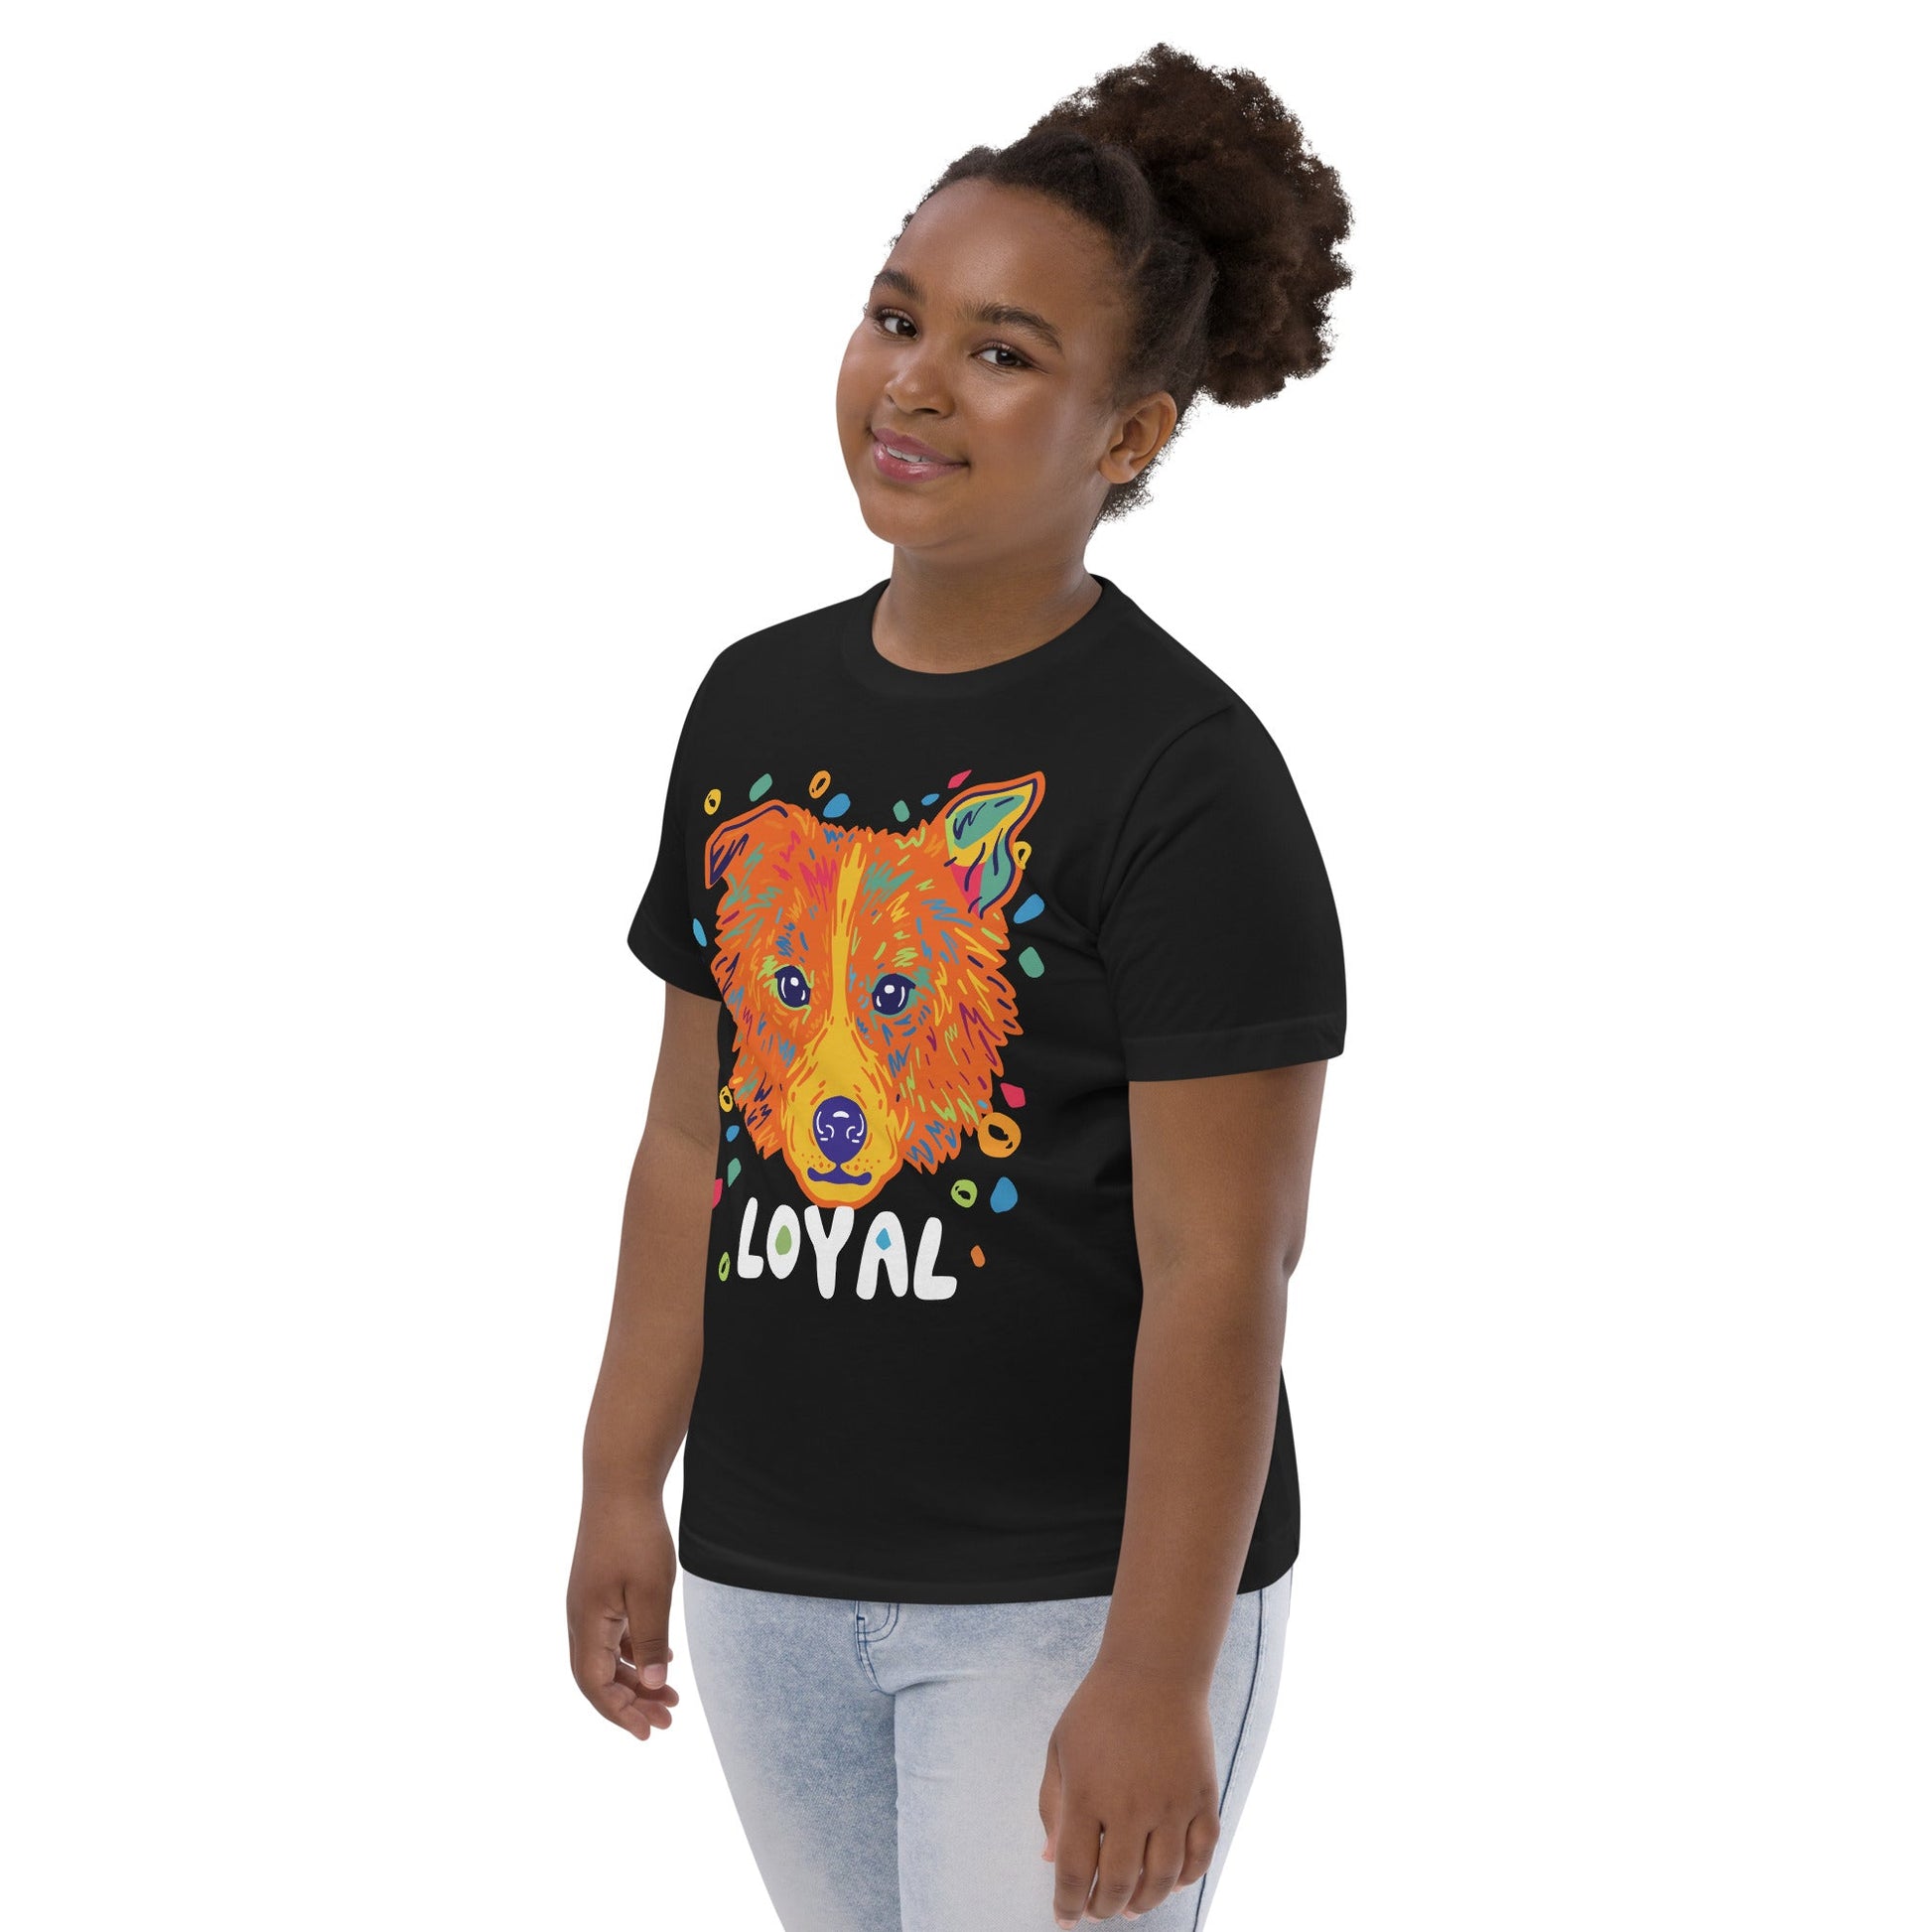 Loyal Dog 🐕 Kids T-Shirt T-Shirt from Wildly Bright